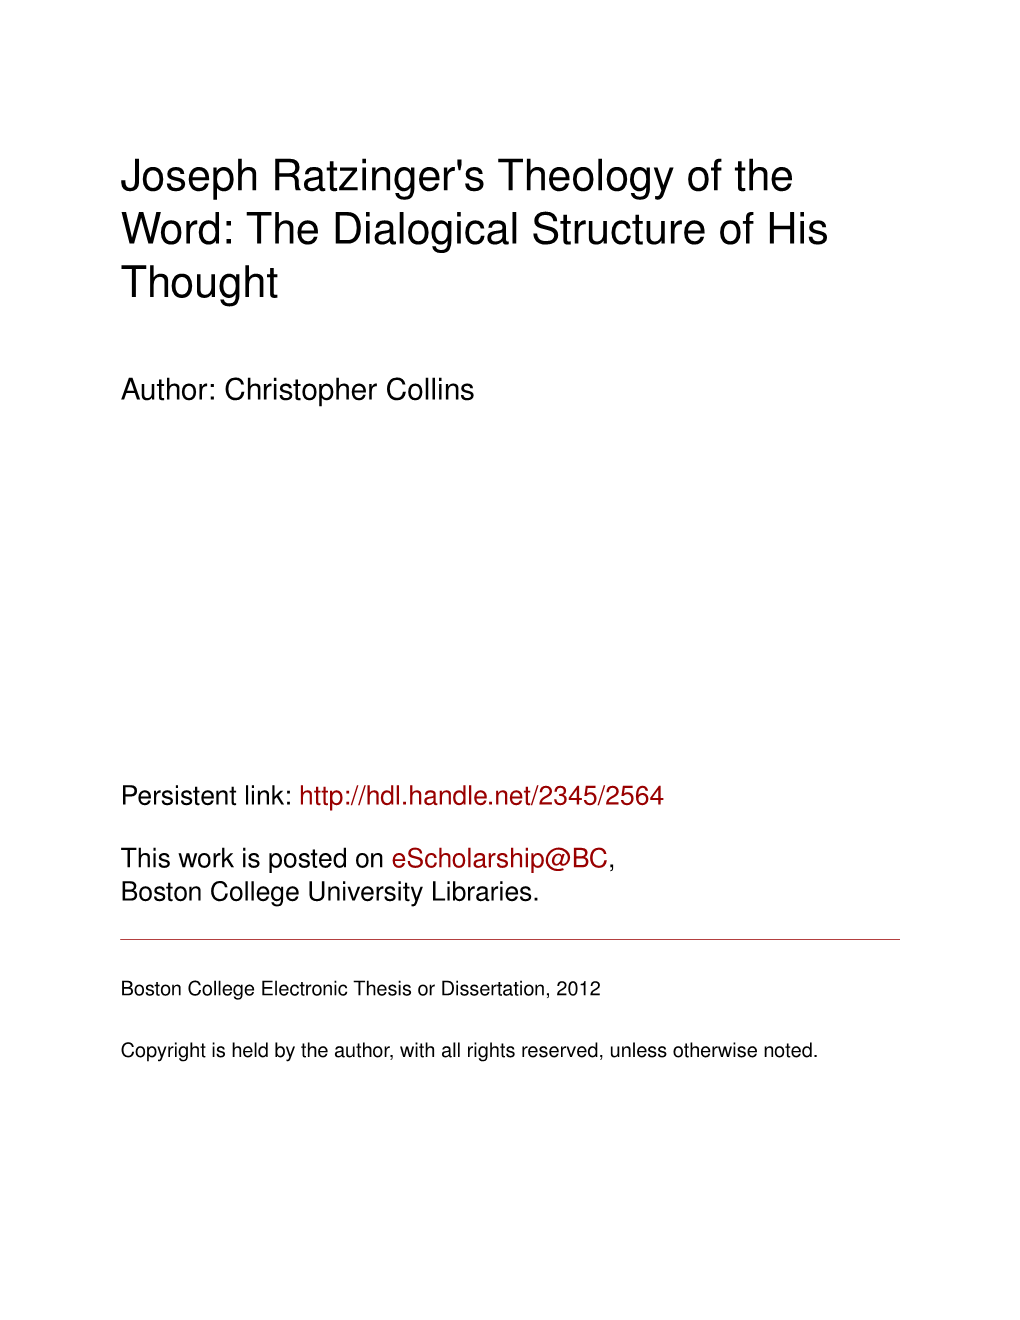 Joseph Ratzinger's Theology of the Word: the Dialogical Structure of His Thought